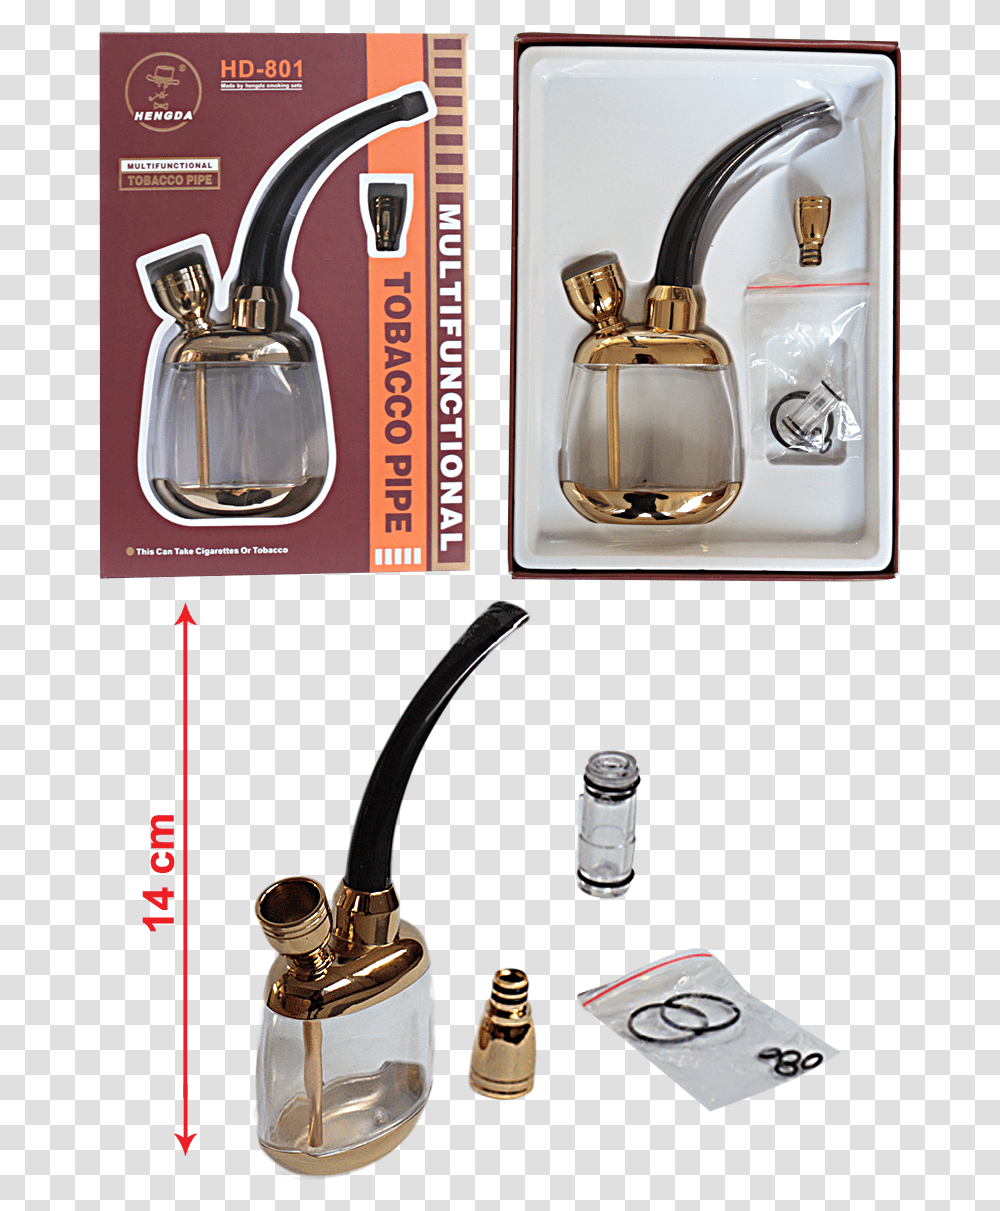 Multi Functional Tobacco Pipe Plumbing Fixture, Bottle, Sink Faucet, Steamer, Label Transparent Png